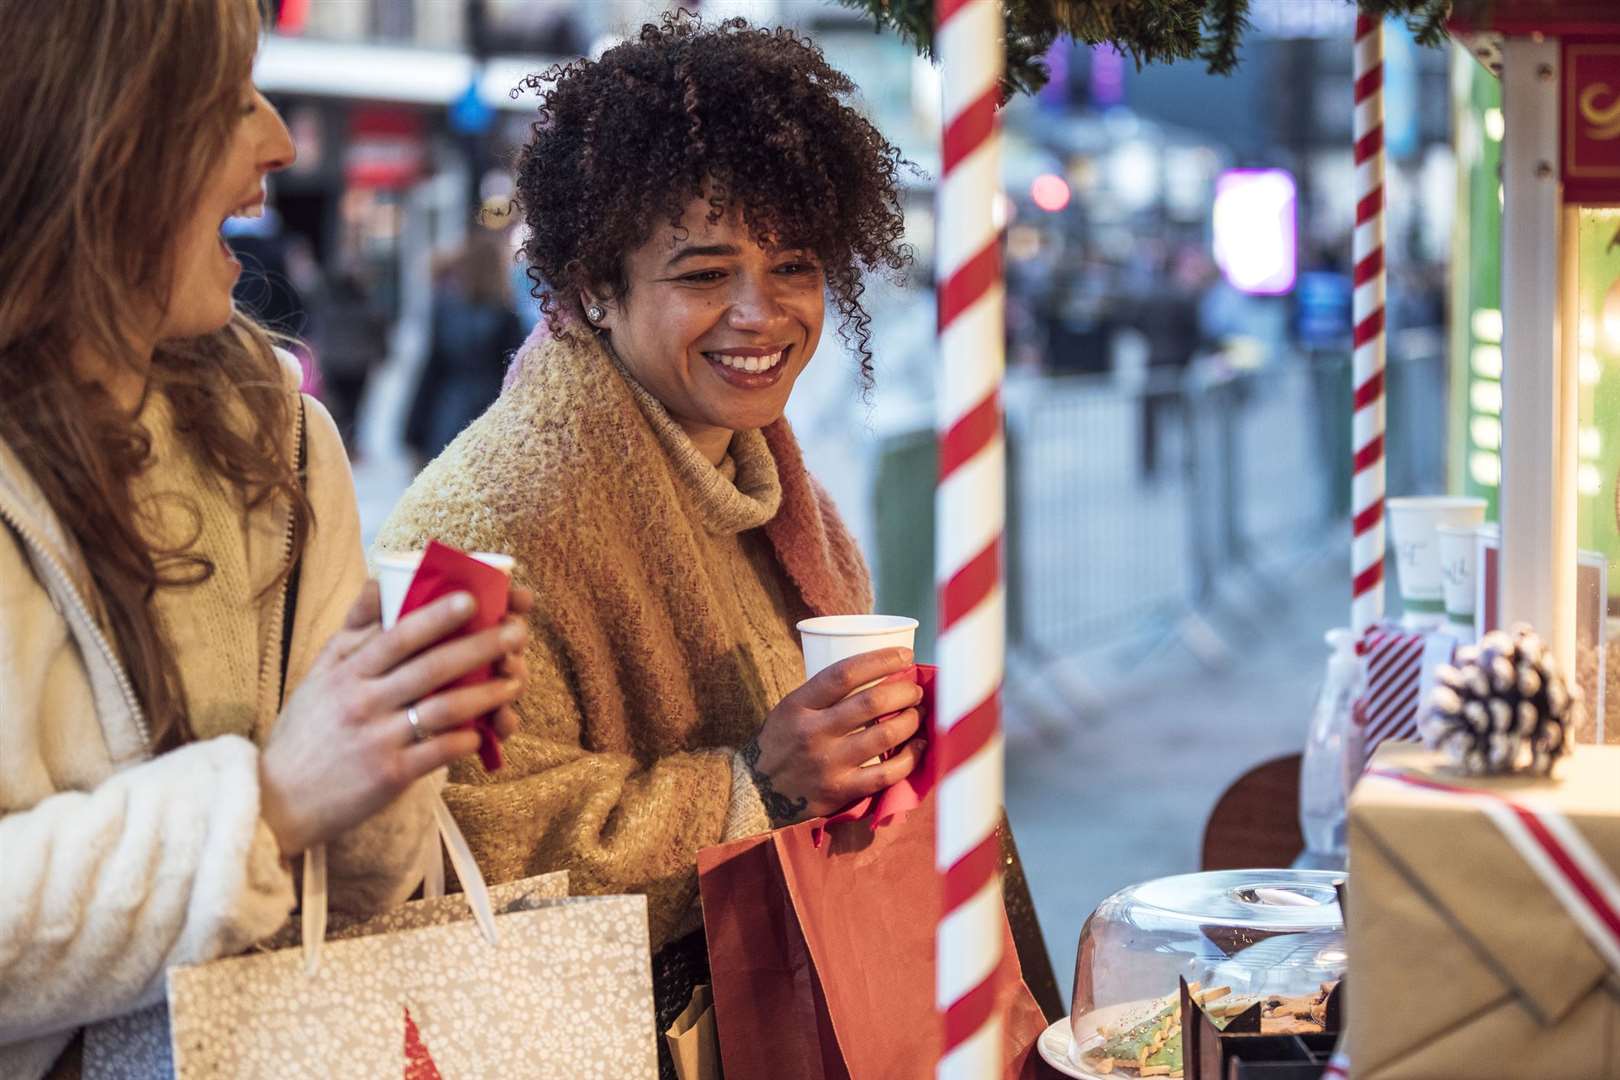 Get into the festive spirit with seasonal food, drink and activities for the whole family at select markets. Picture: iStock